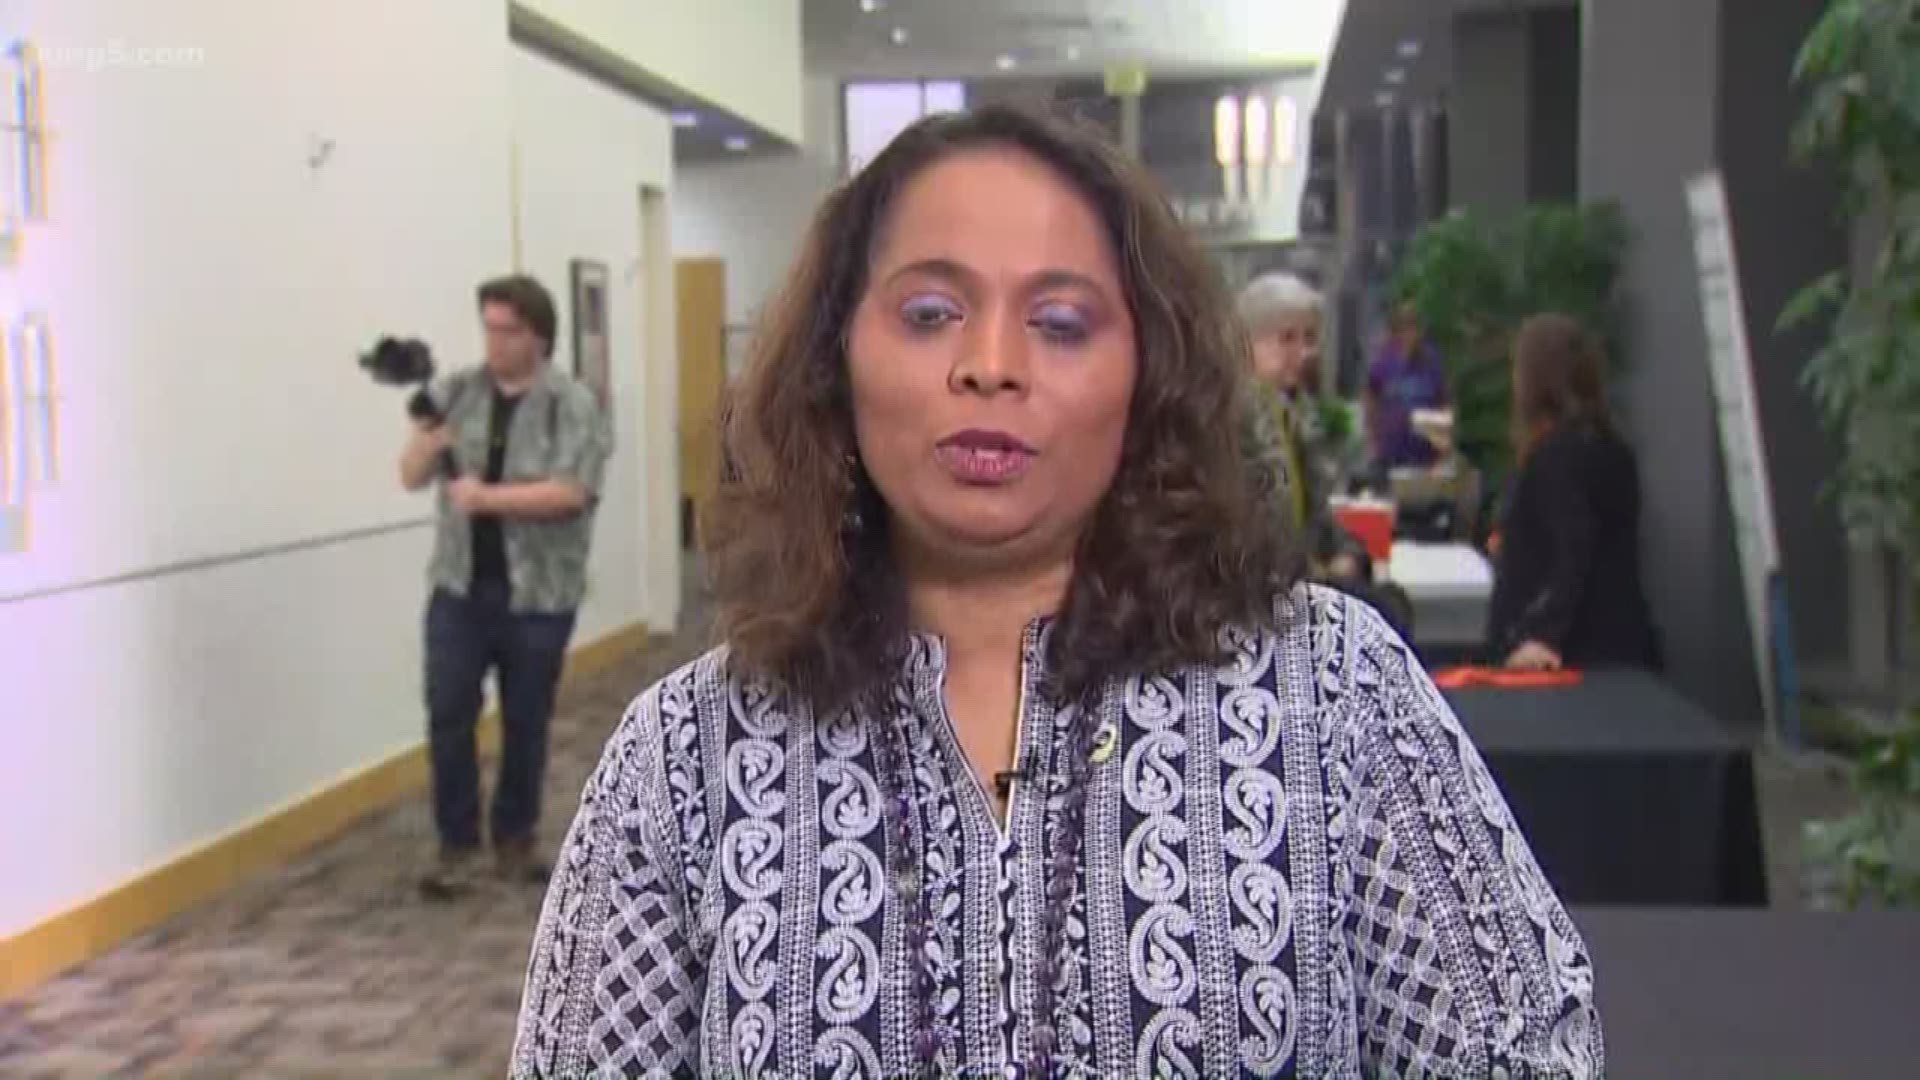 KING 5 spoke with Chaitra Vedullapalli, the CMO and Co-Founder of Women in Cloud, about the summit this weekend that seeks to create more economic access for women.